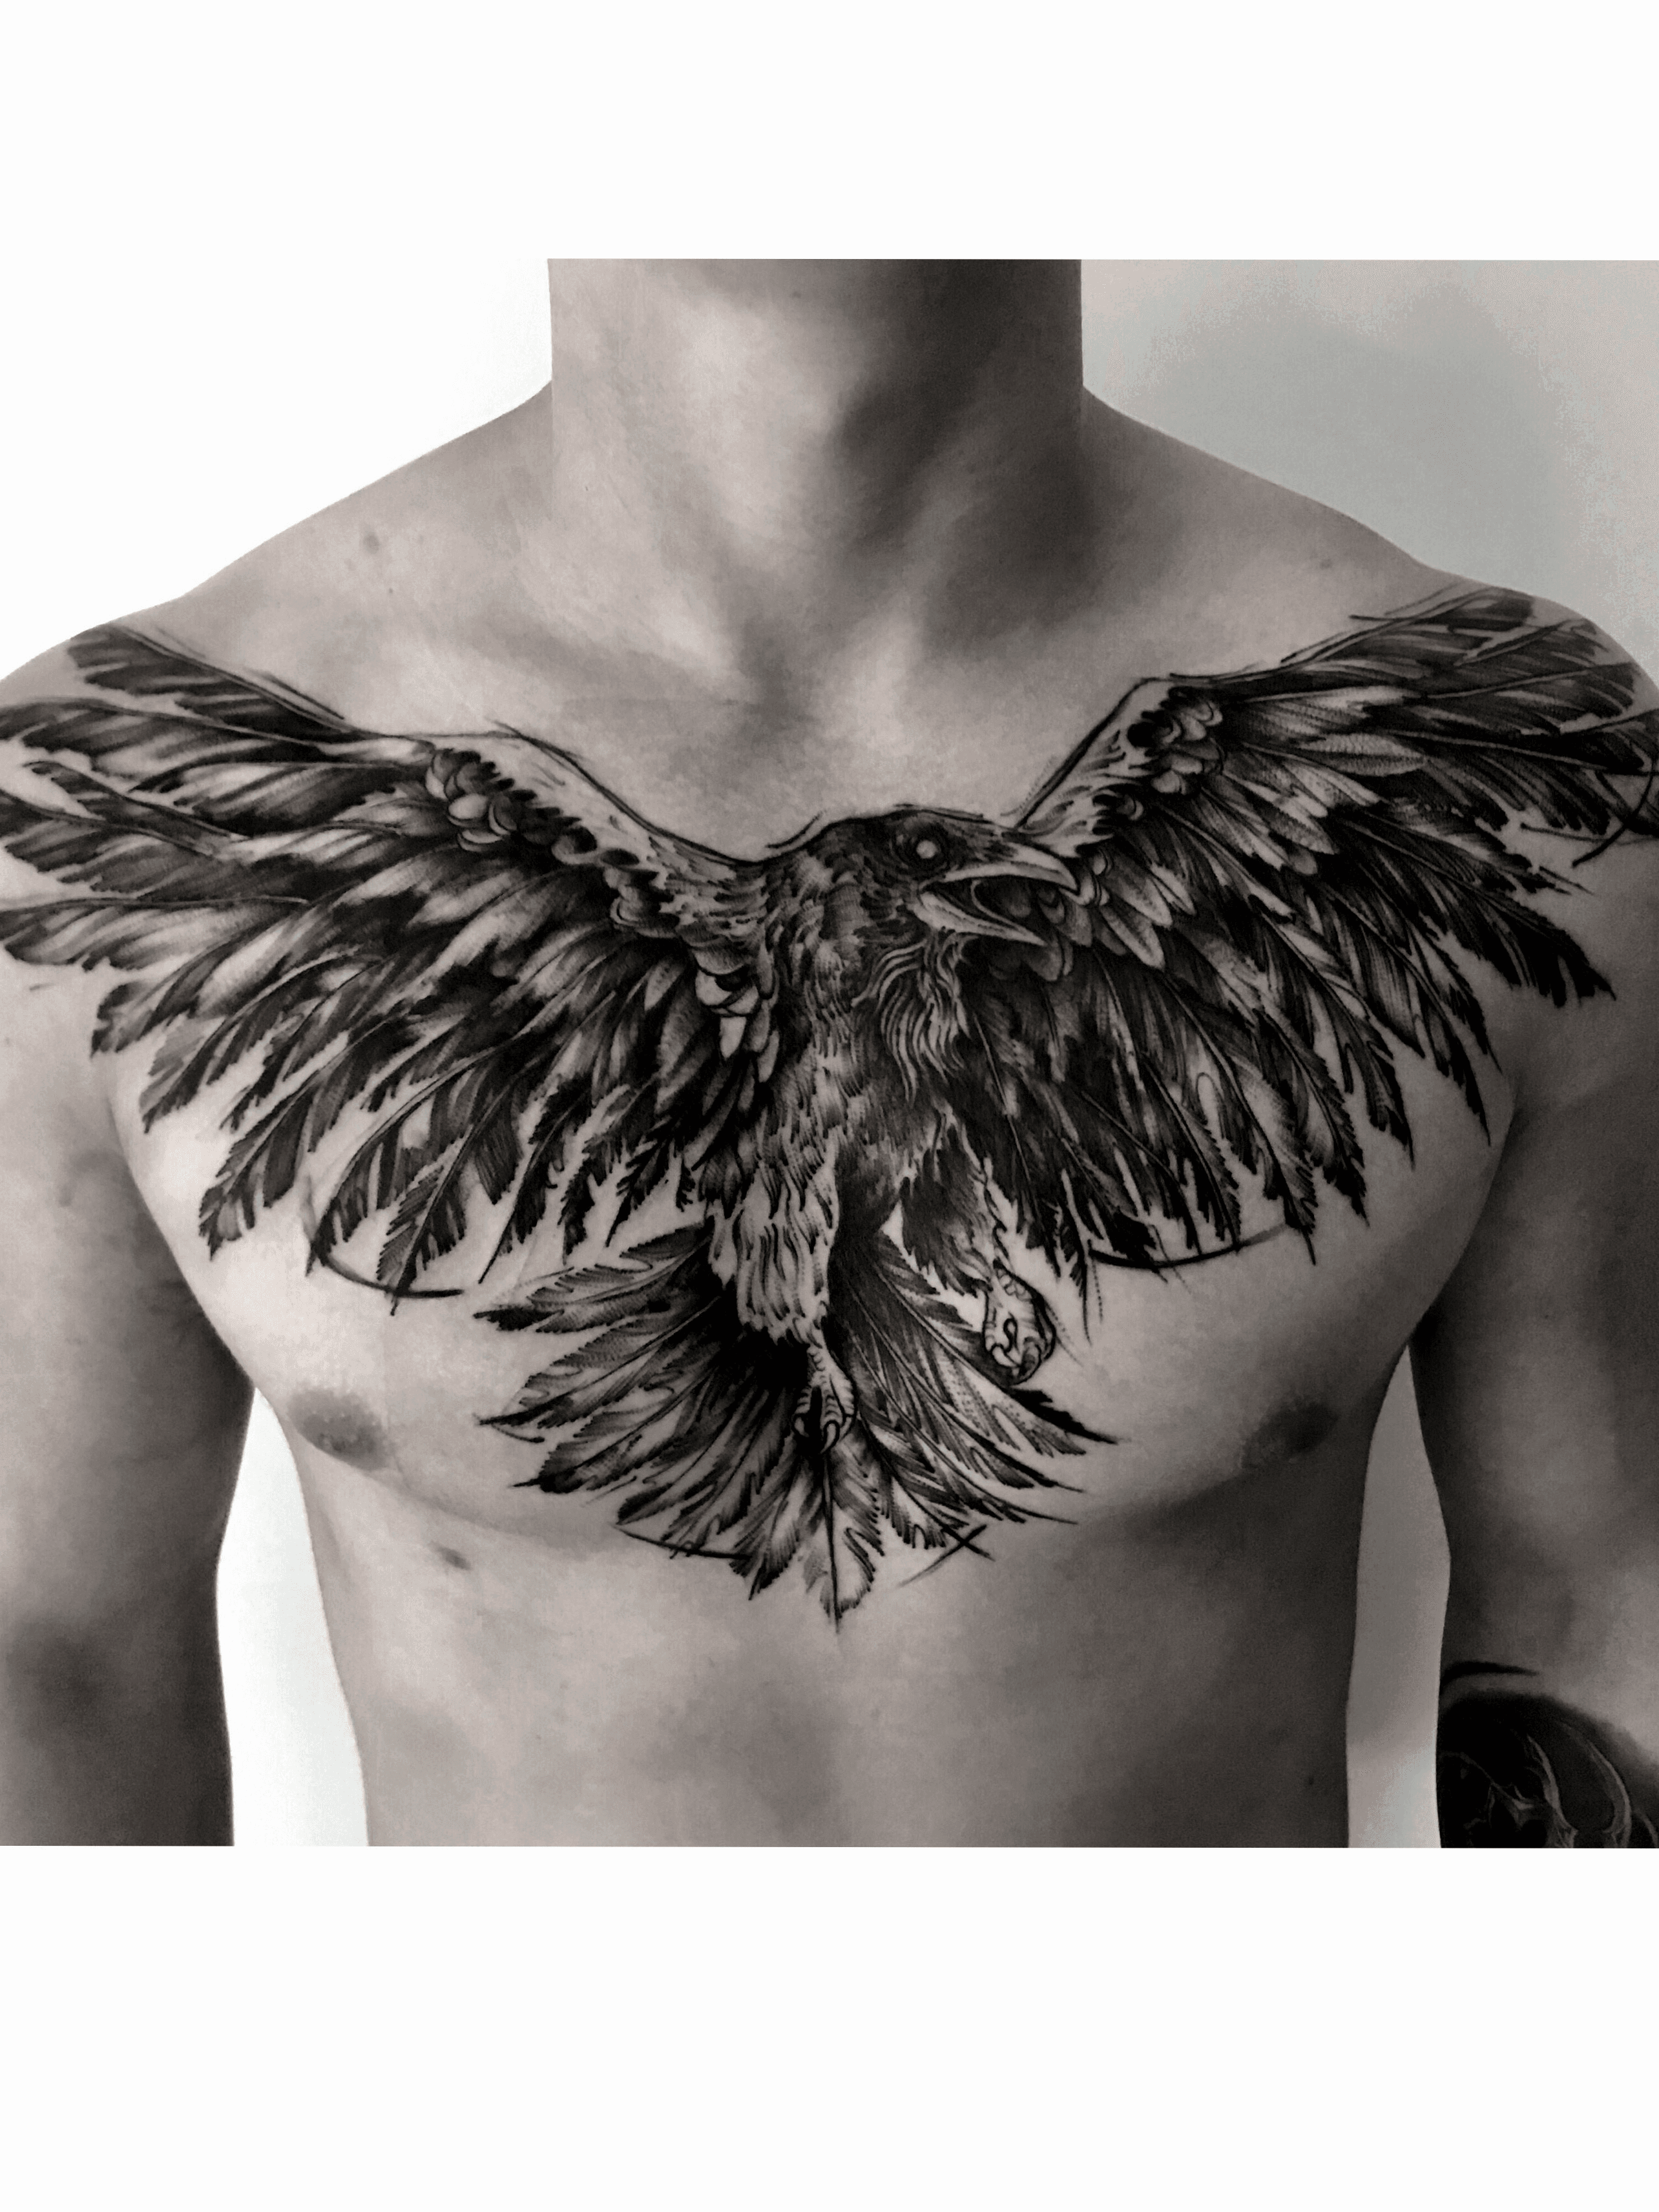 40 Traditional Crow Tattoo Designs For Men  Old School Birds  Cover up  tattoos for men Tattoos for guys Chest tattoo cover up